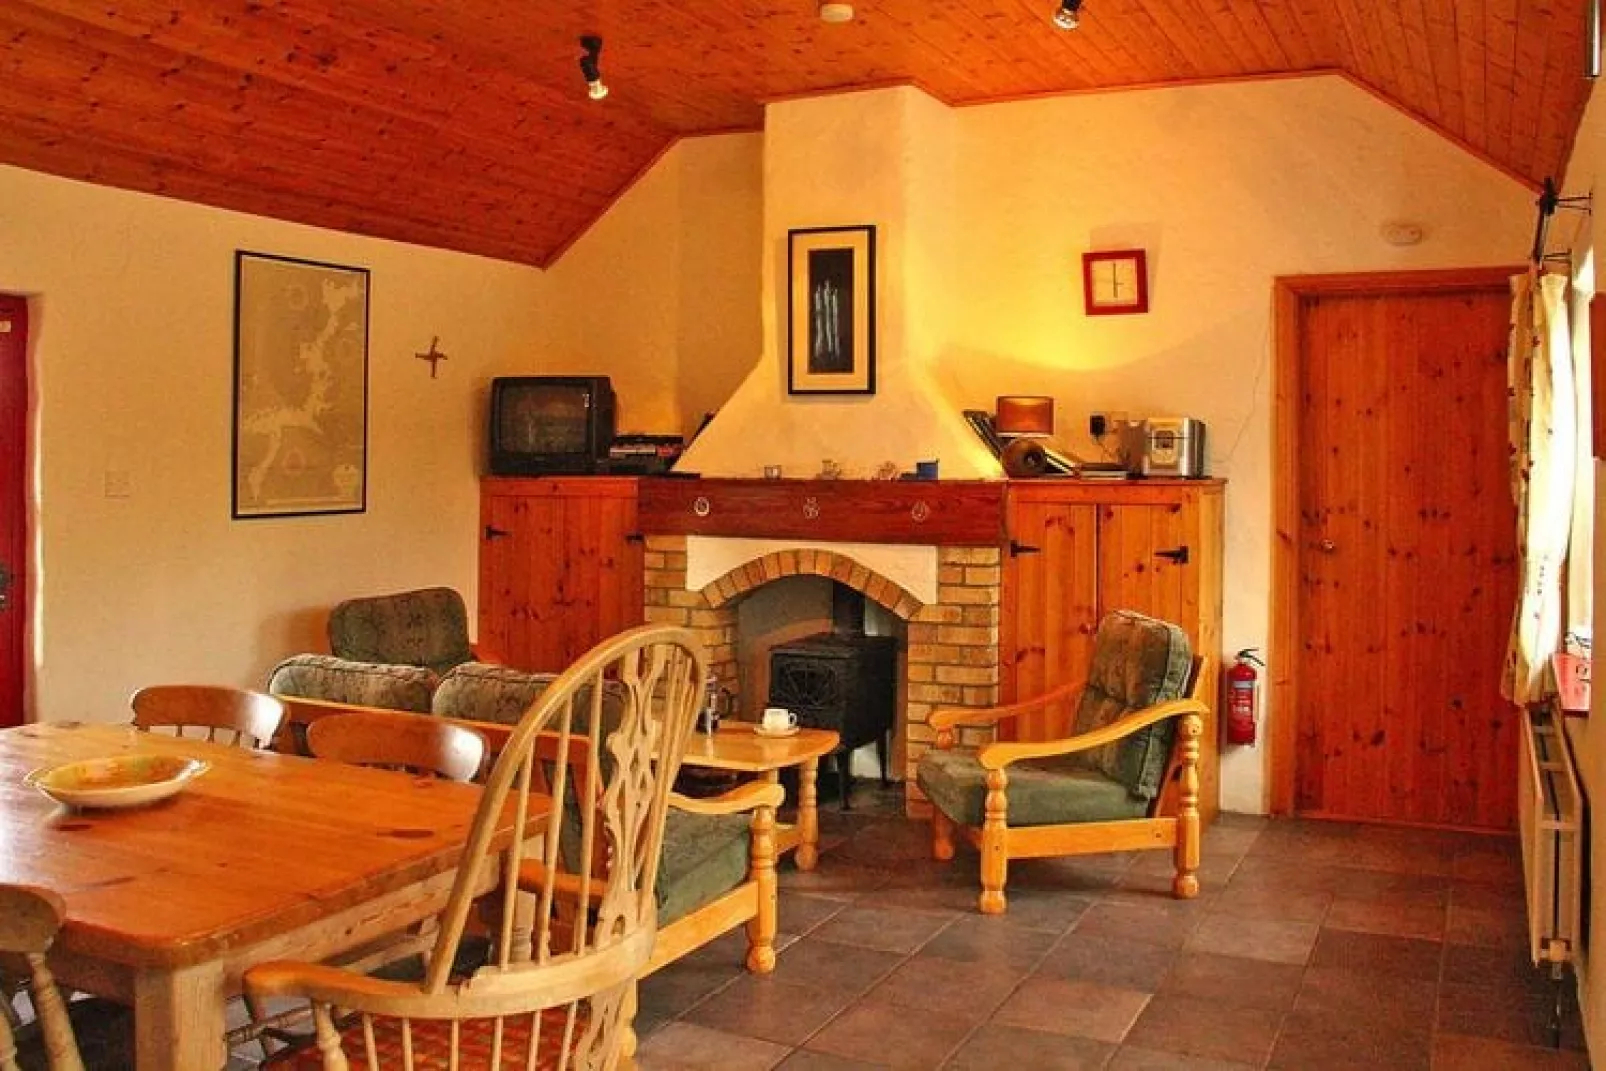 Lime Kiln Cottage Terryglass Co Tipperary-Woonkamer